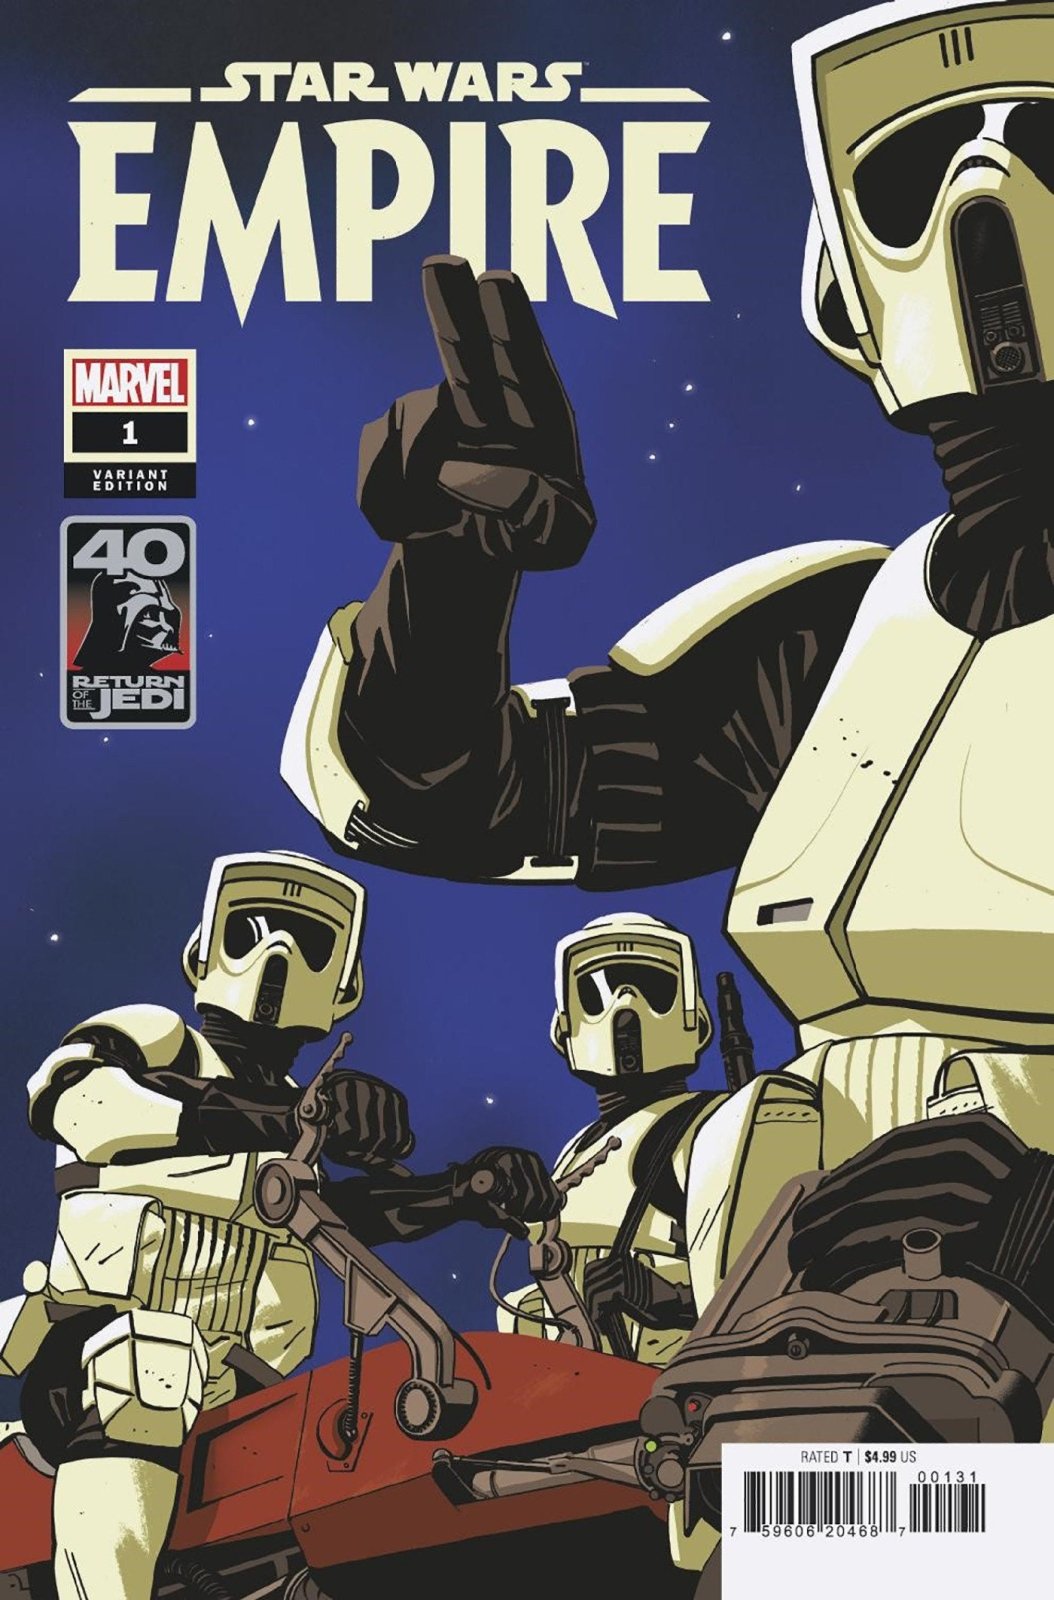 Star Wars: Return Of The Jedi - The Empire 1 Tom Reilly Variant - The Fourth Place